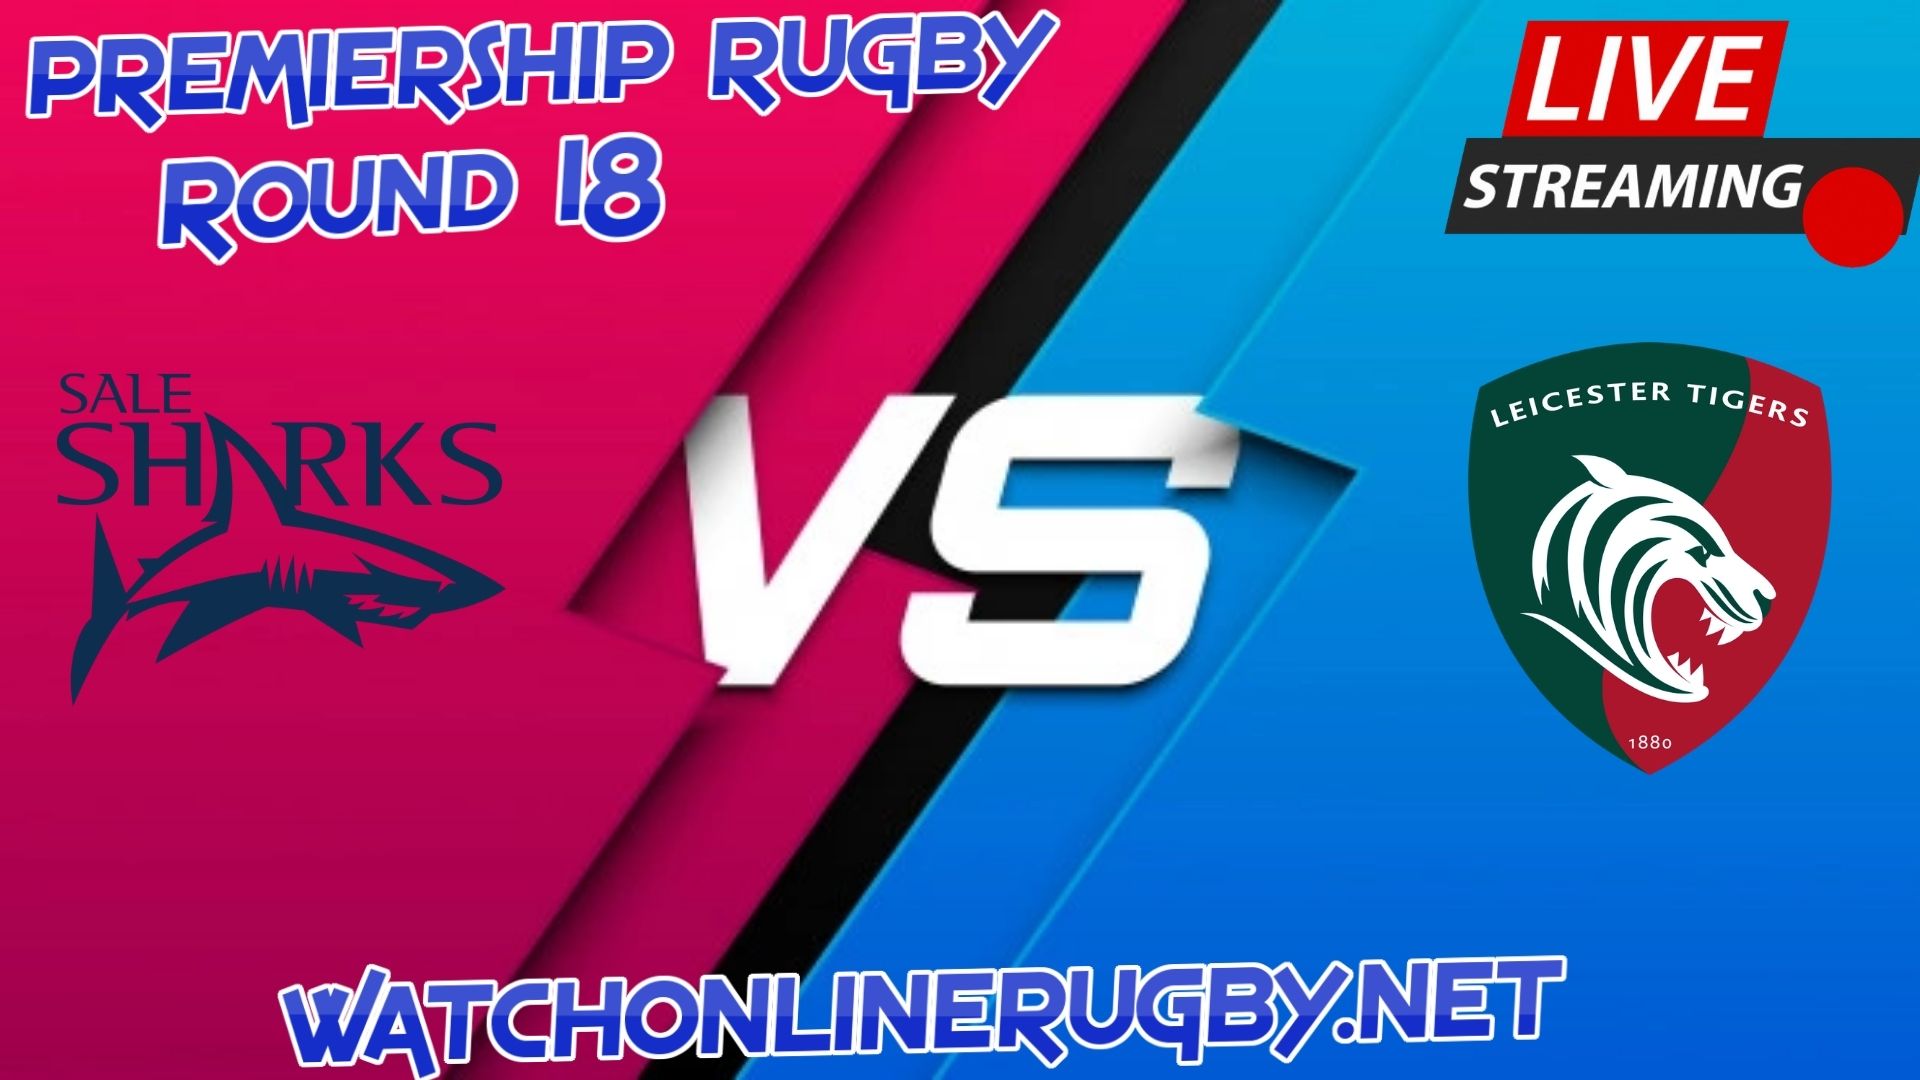 Sale Sharks Vs Leicester Tigers Live Stream